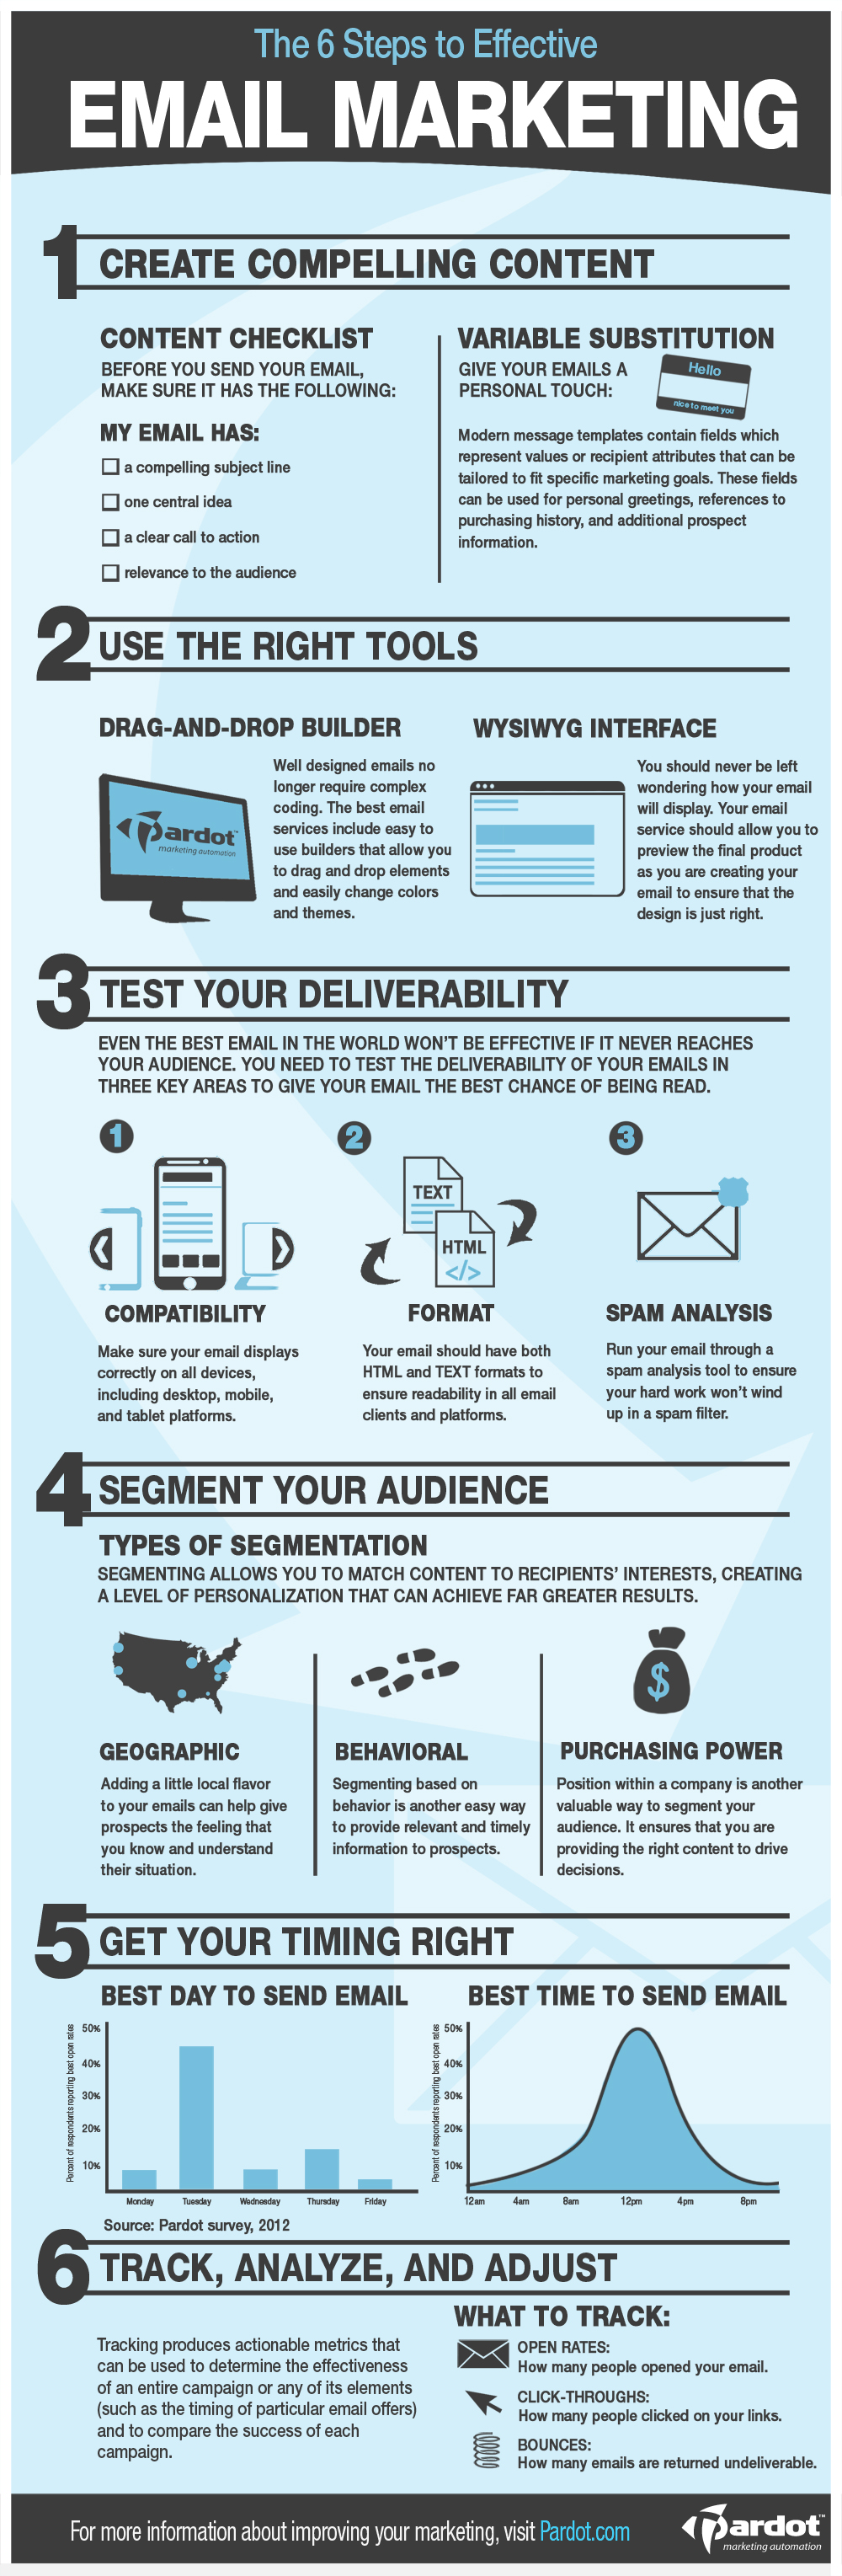 6-steps-to-effective-email-marketing_5035177eee13b